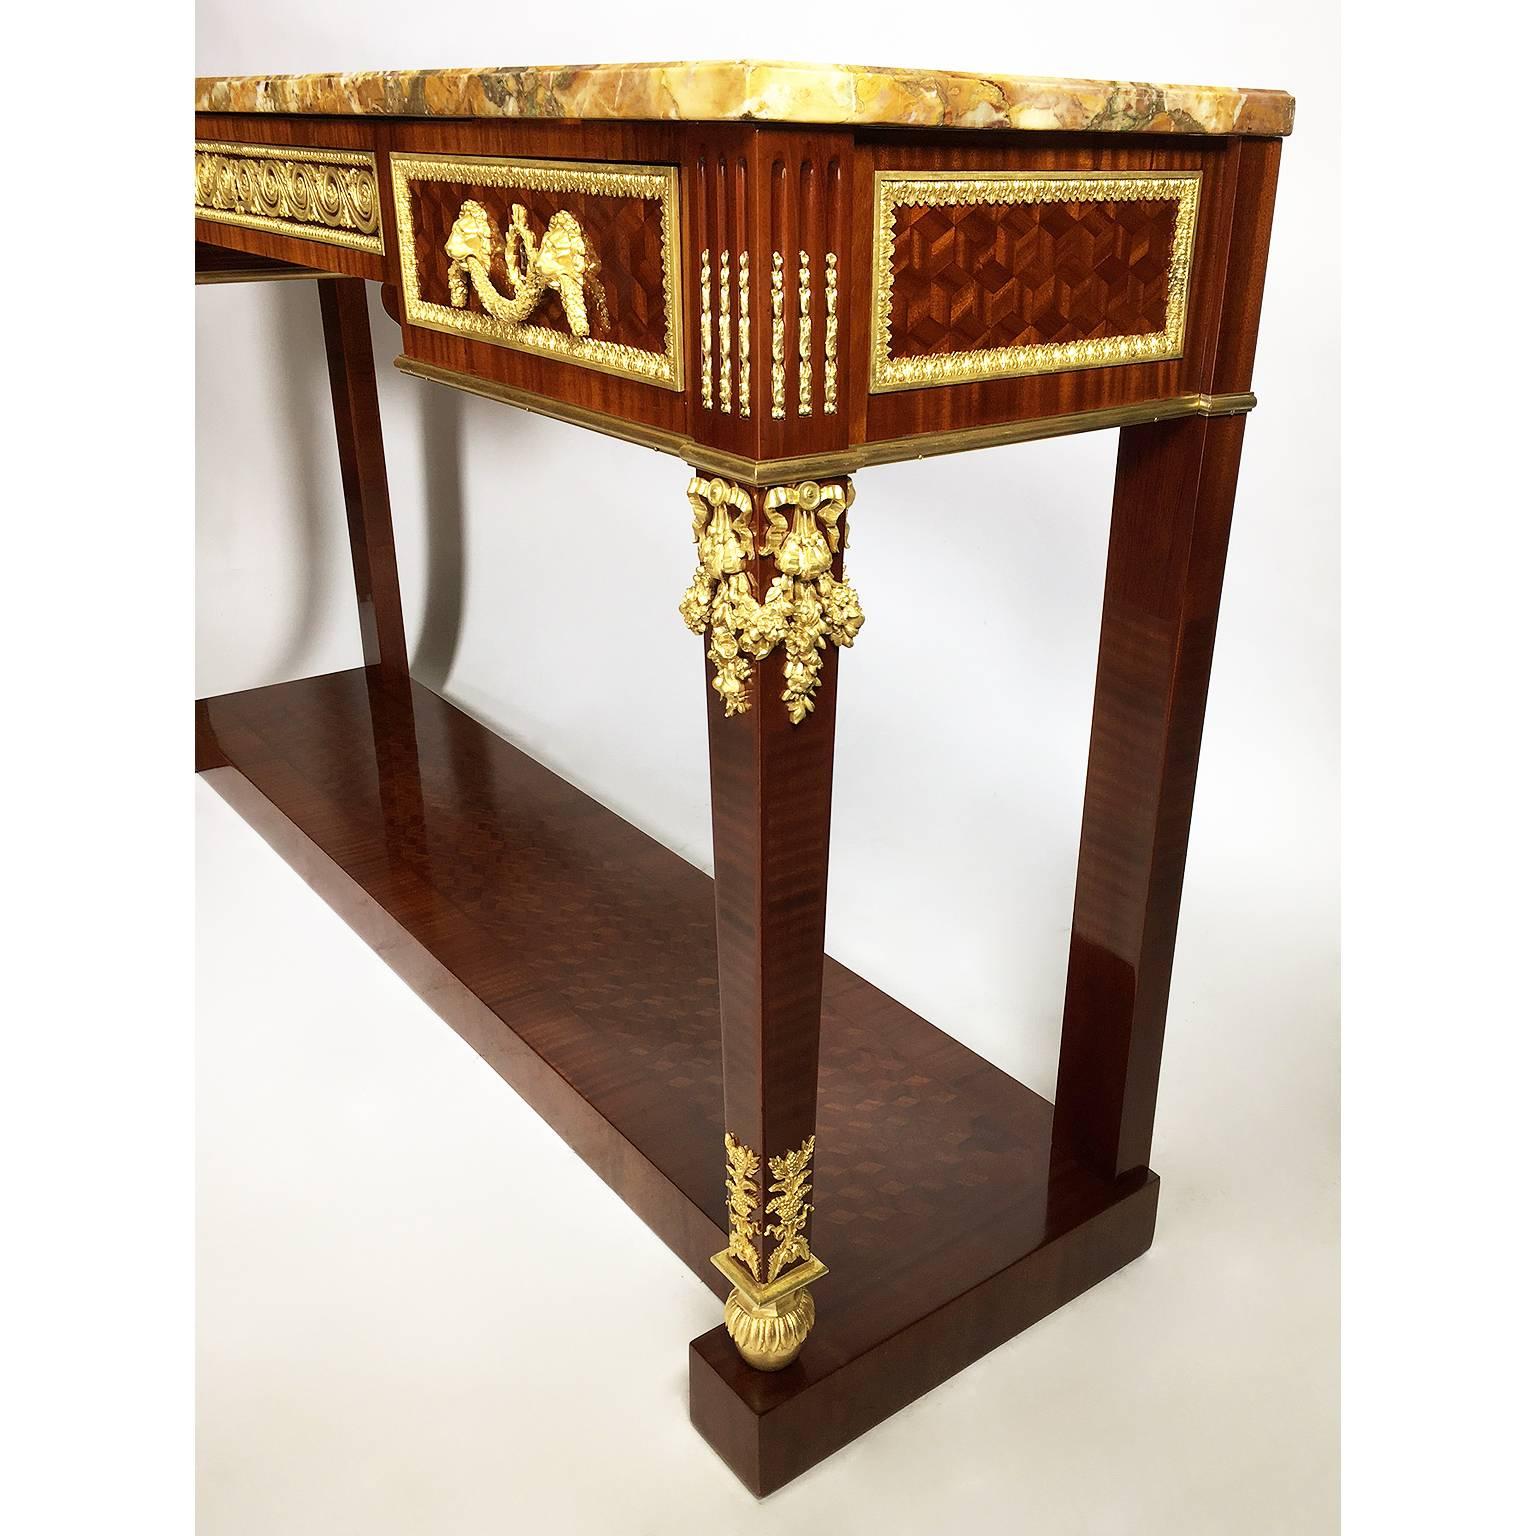 Early 20th Century 19th-20th Century Louis XVI Style Gilt-Bronze Mounted Console Table by Forest